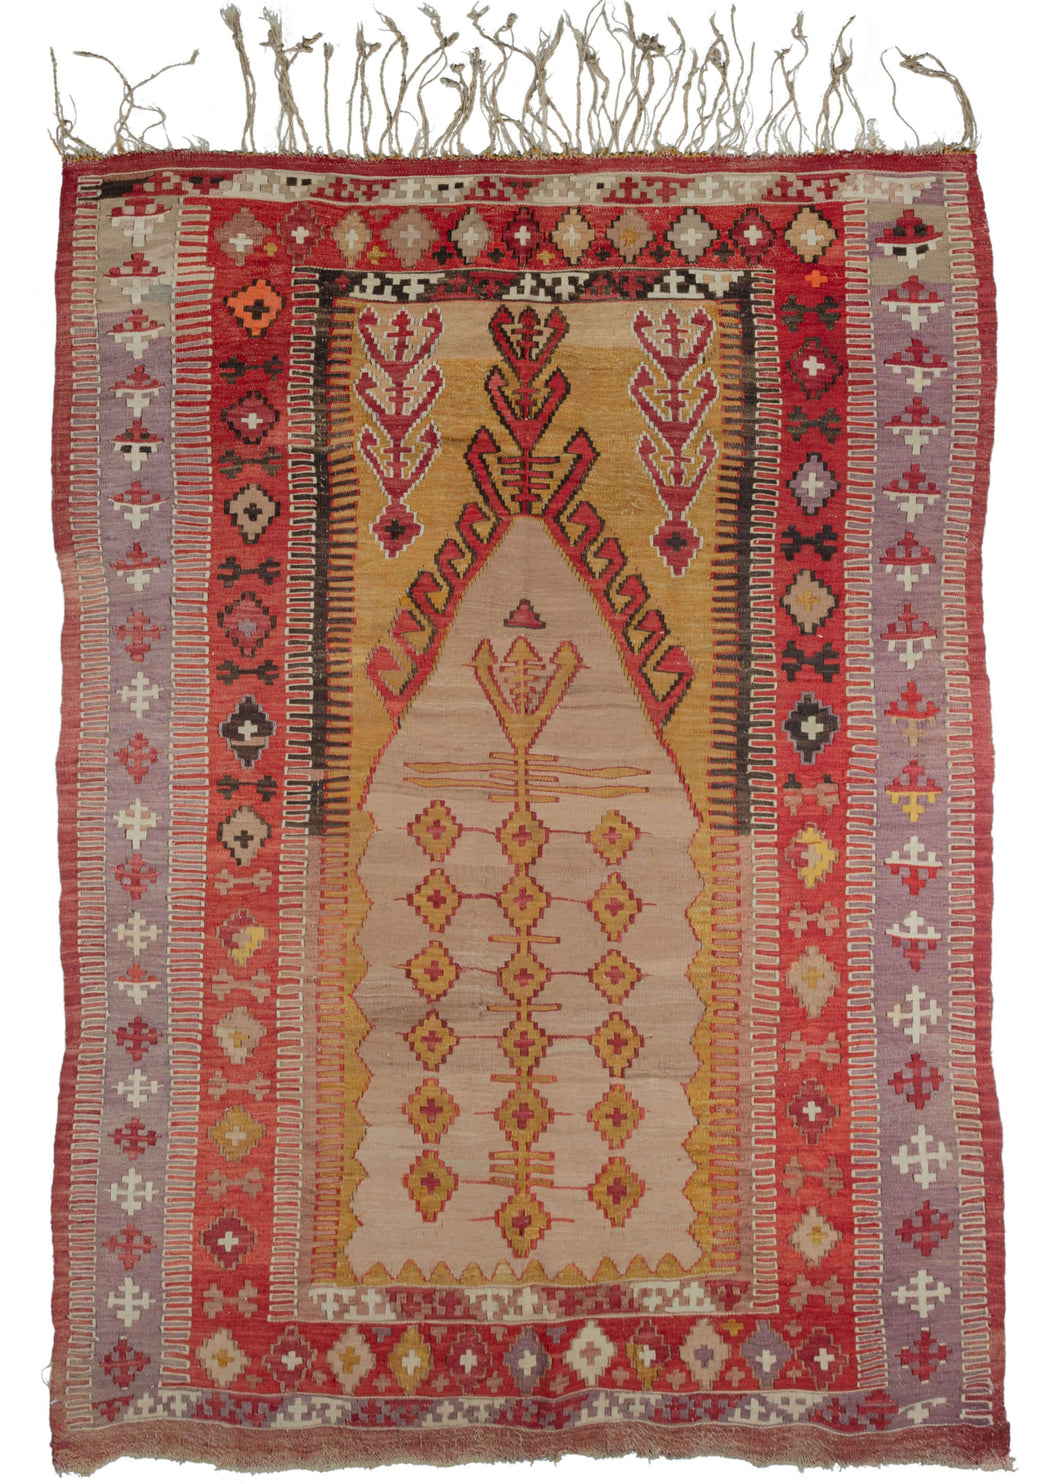 Antique Turkish Obruk Prayer kilim featuring a soft color palette of yellows, reds, and purples with black and white wool used for the details. The design is directional with a large mihrab with an abstract geometric design utilizing diamonds and latch hooks.